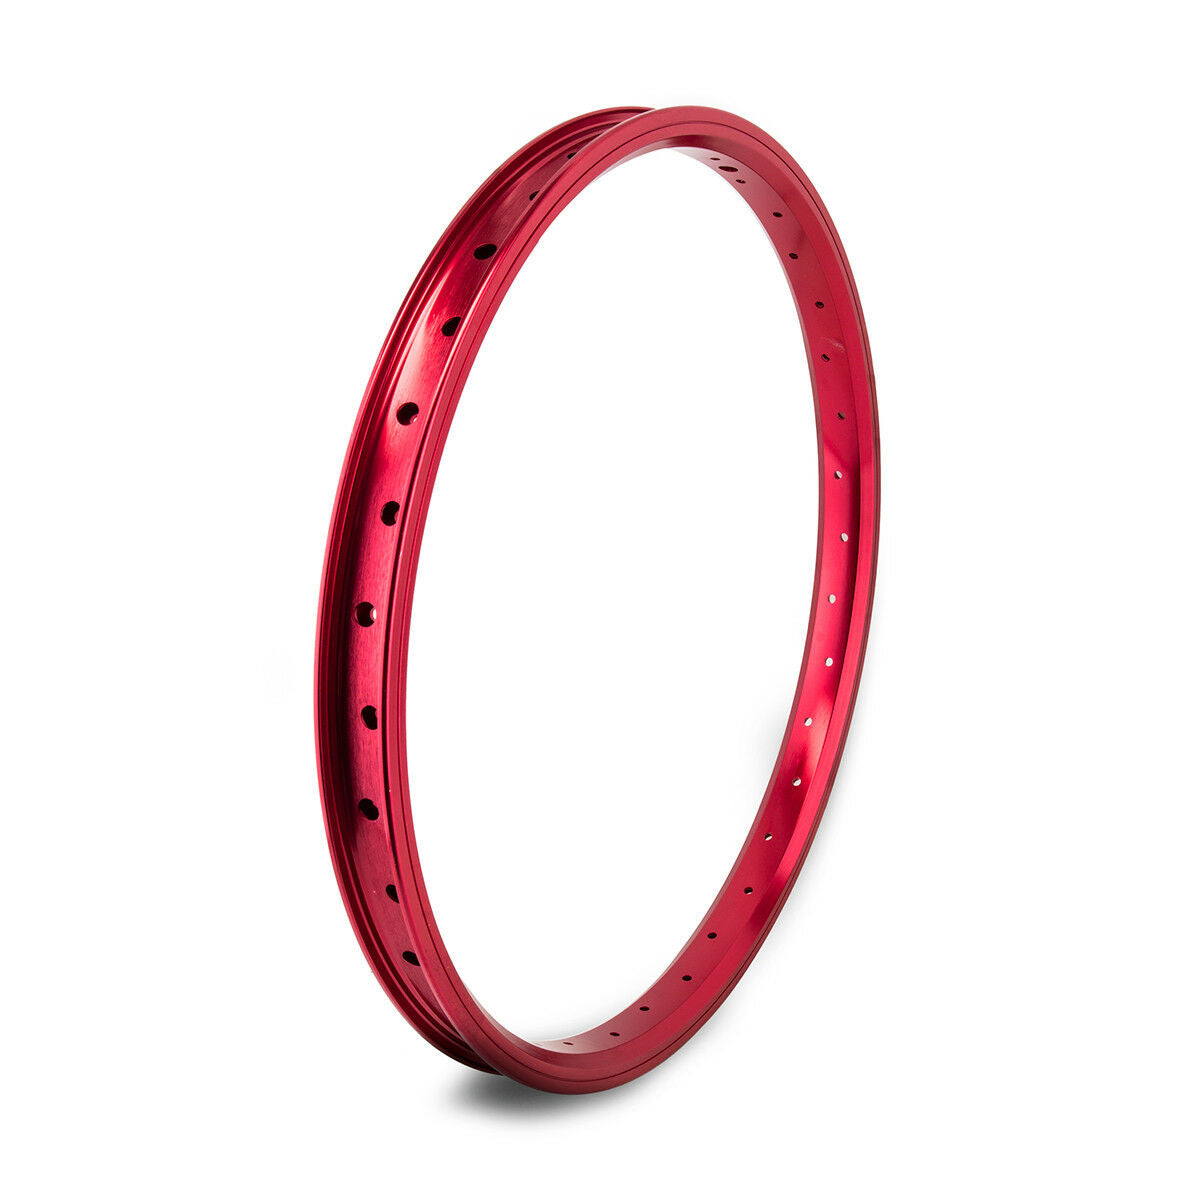 20" SE Racing J24SG Double Wall Rim - 36H - Red Anodized